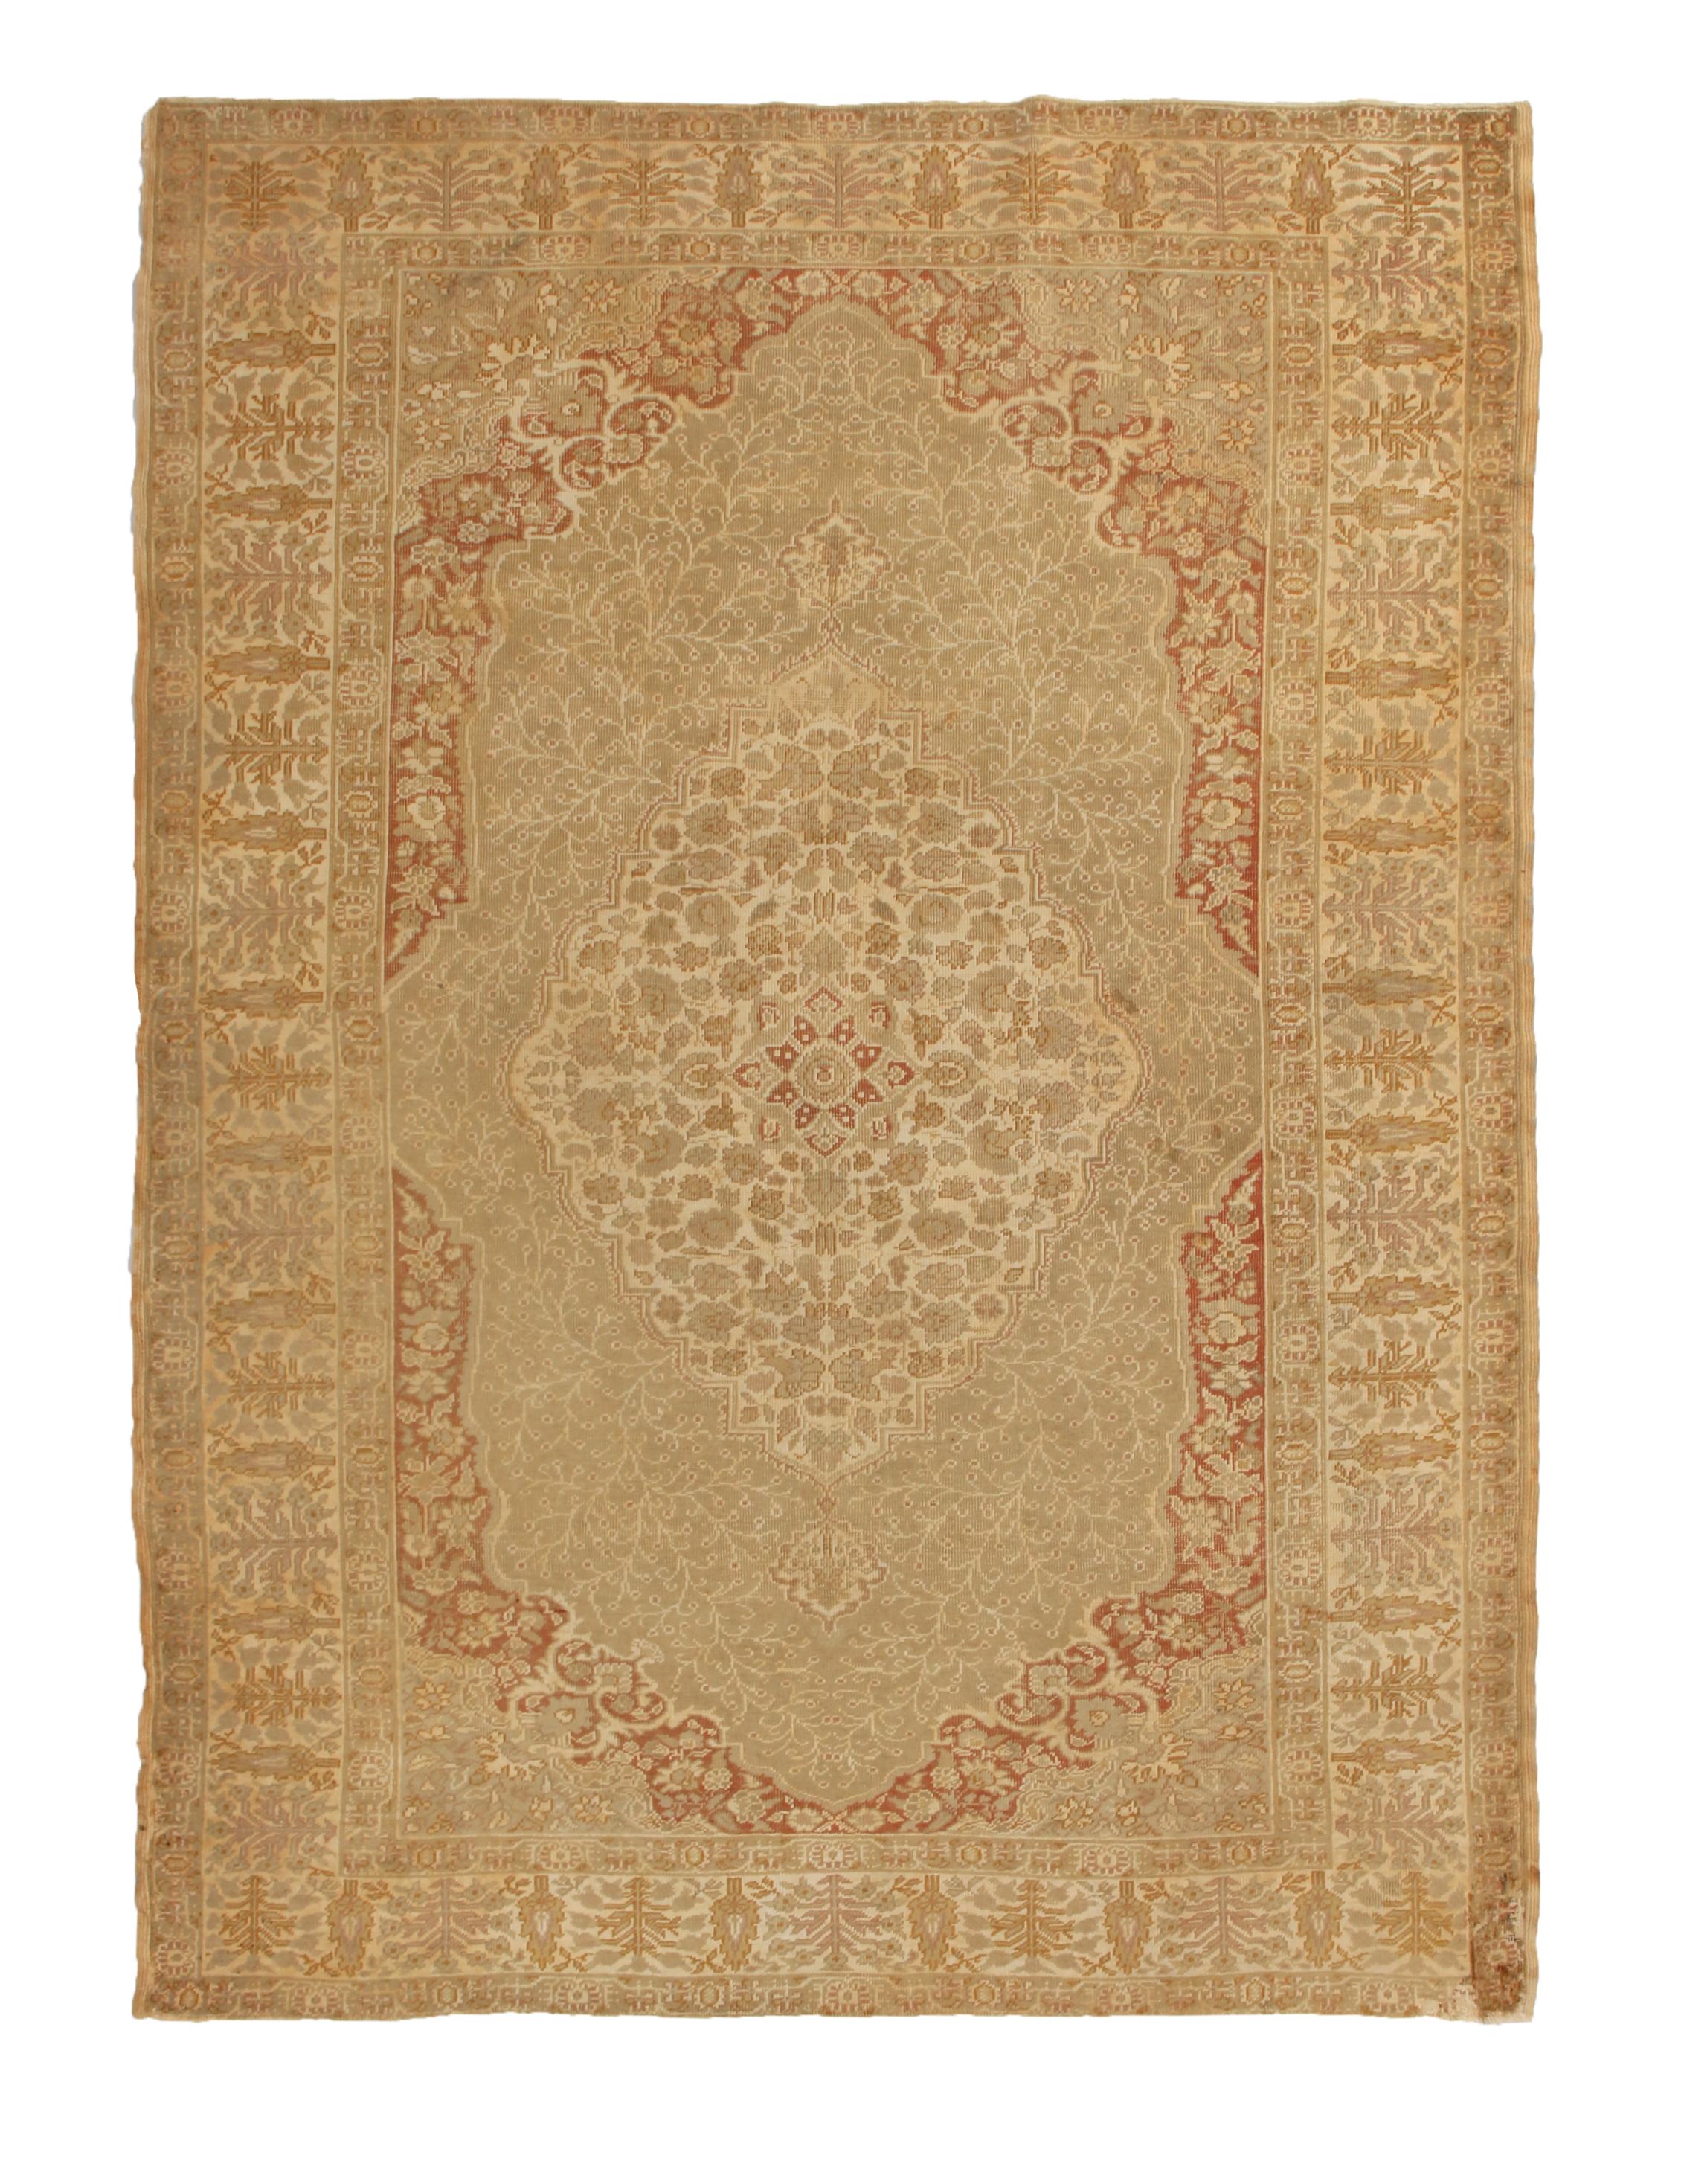 Hand knotted with a brilliant silk body originating from Turkey in 1890, this antique Kayseri rug is one of a select series to create distinction underfoot with equal attention to its border and medallion style field design. Featuring a rare, rustic